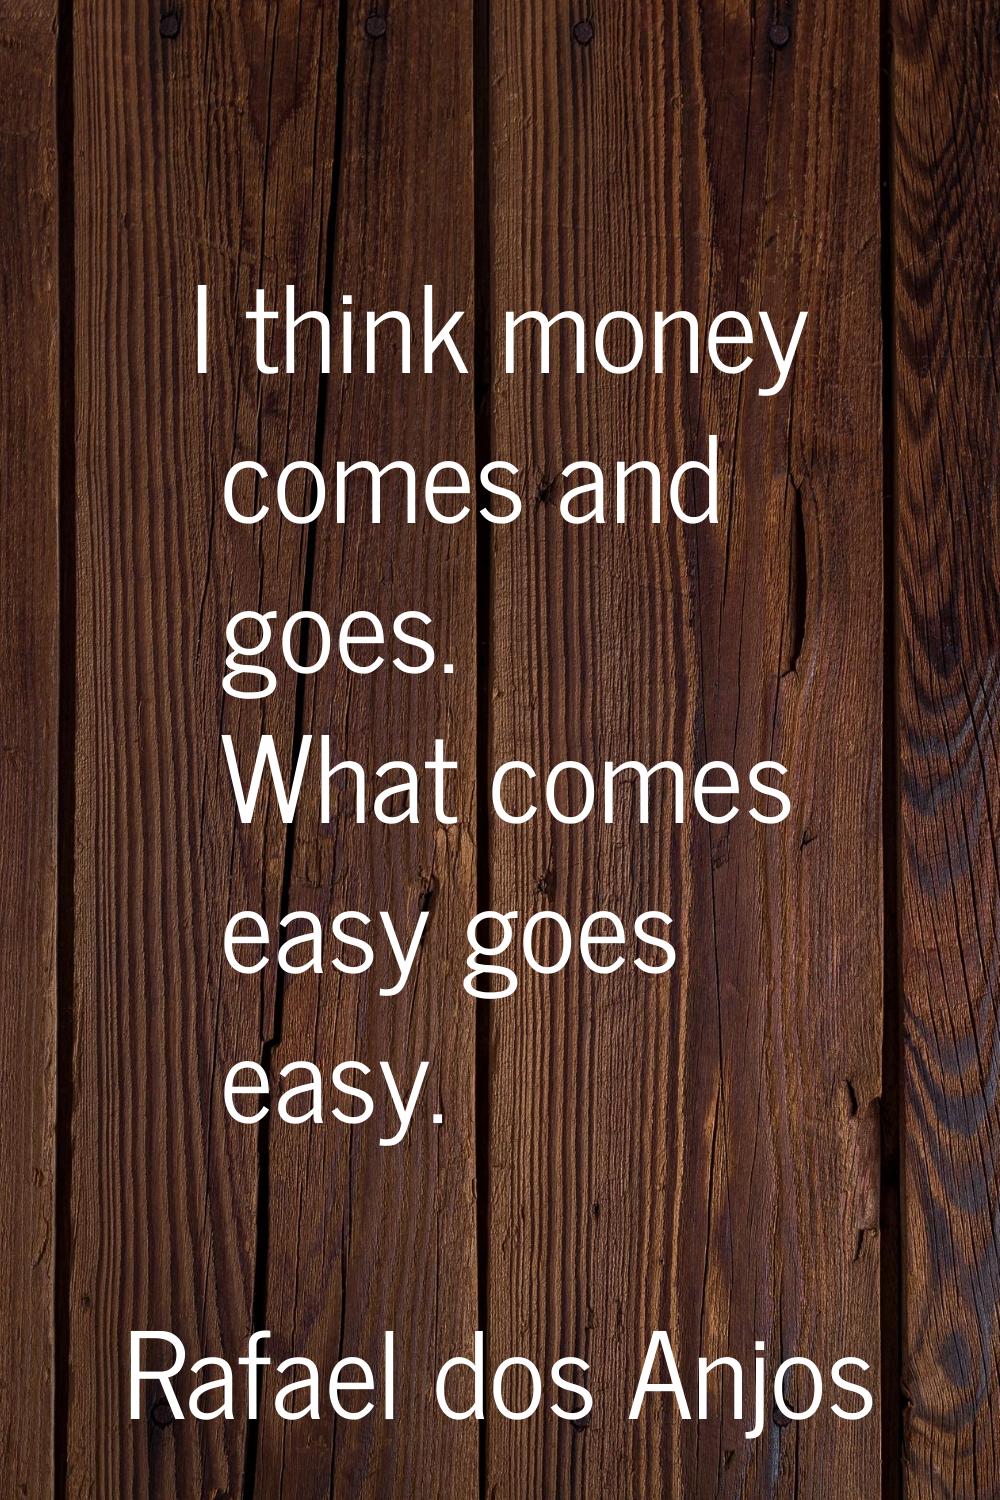 I think money comes and goes. What comes easy goes easy.